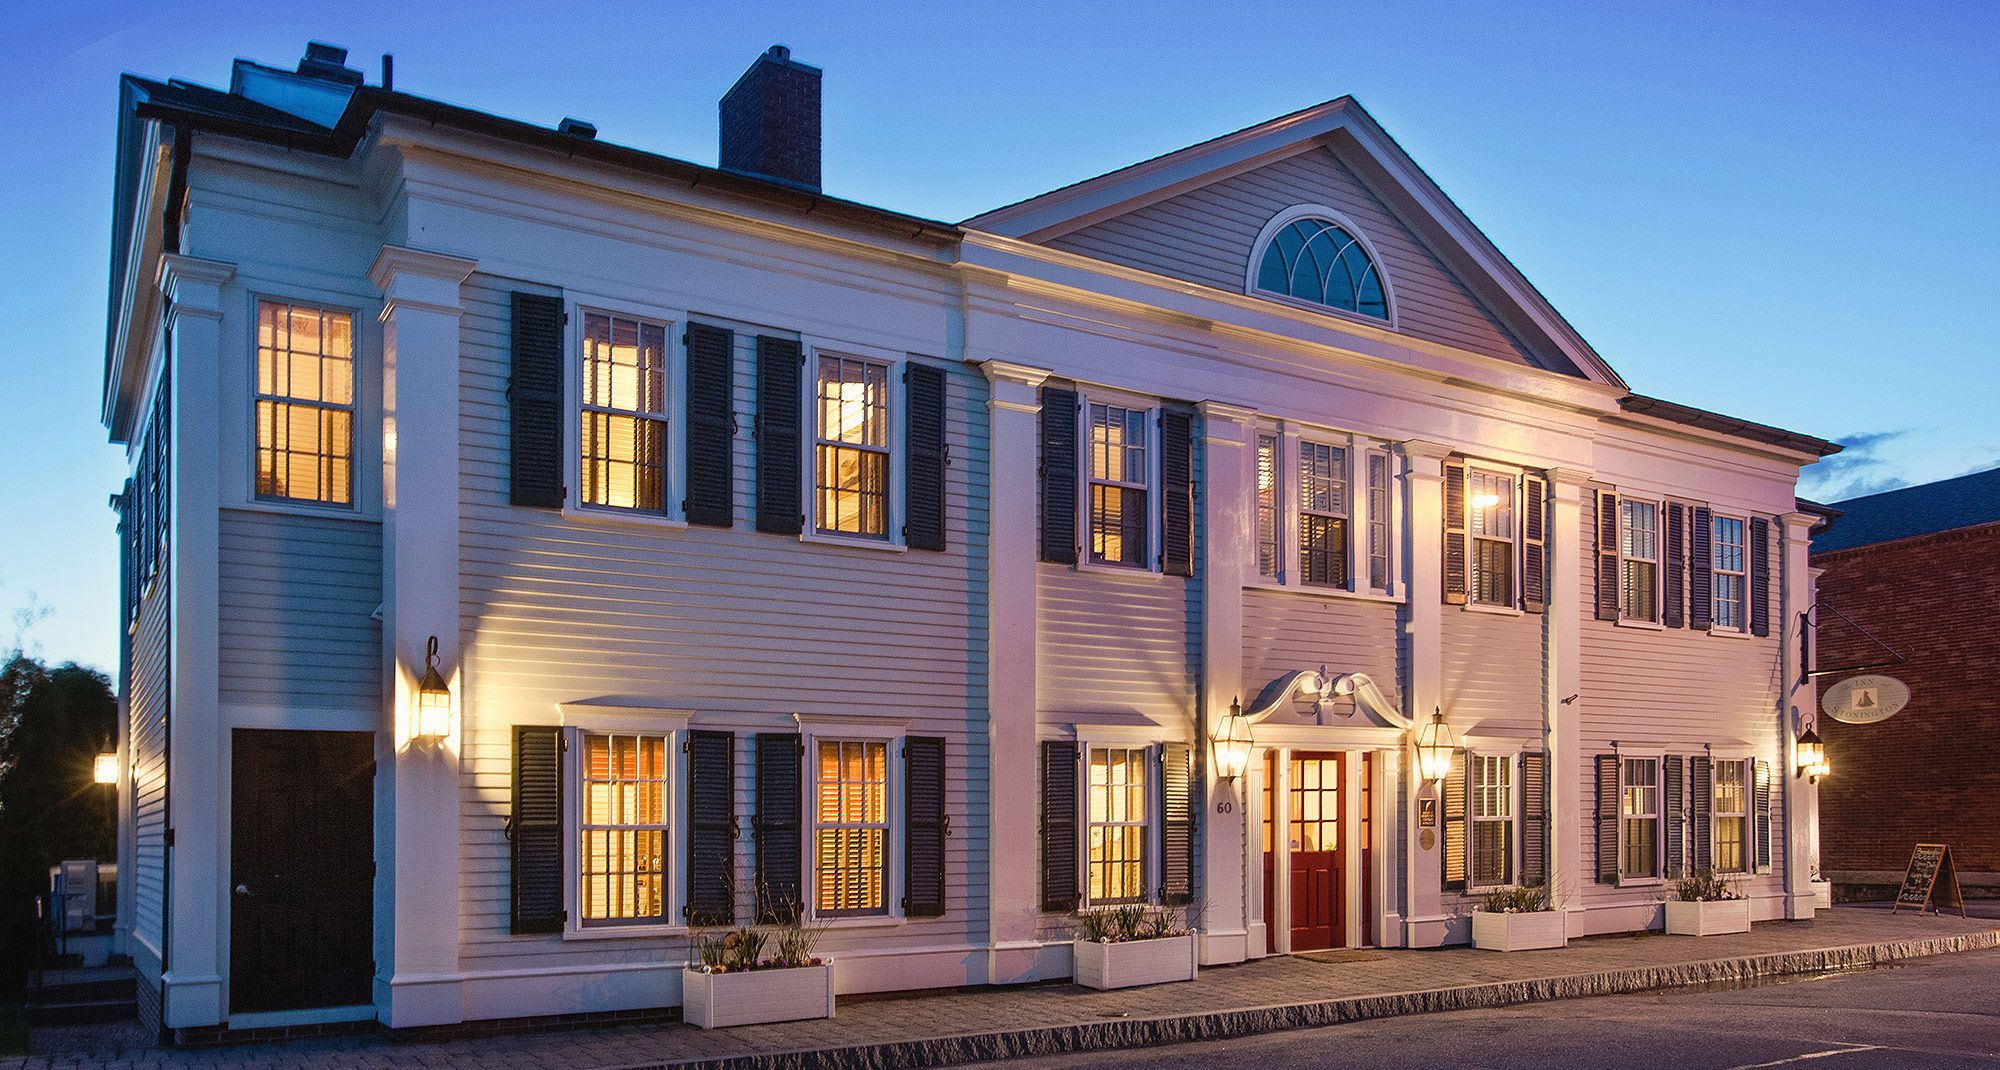 New England Inns With Fireplaces in Every Room